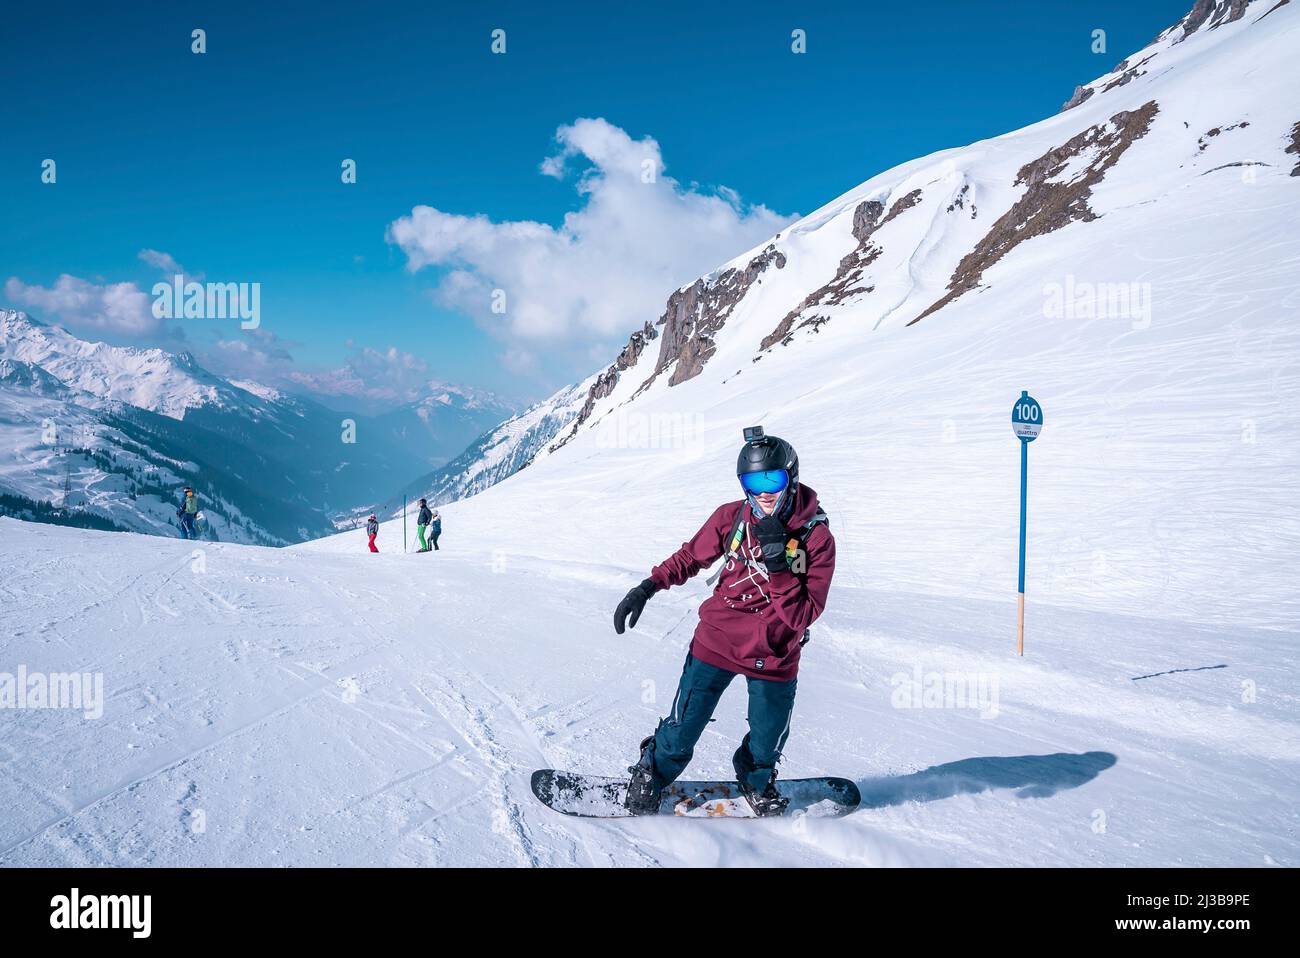 Premium Photo  Young snowboarder sliding down snowy slope on mountain at  winter resort